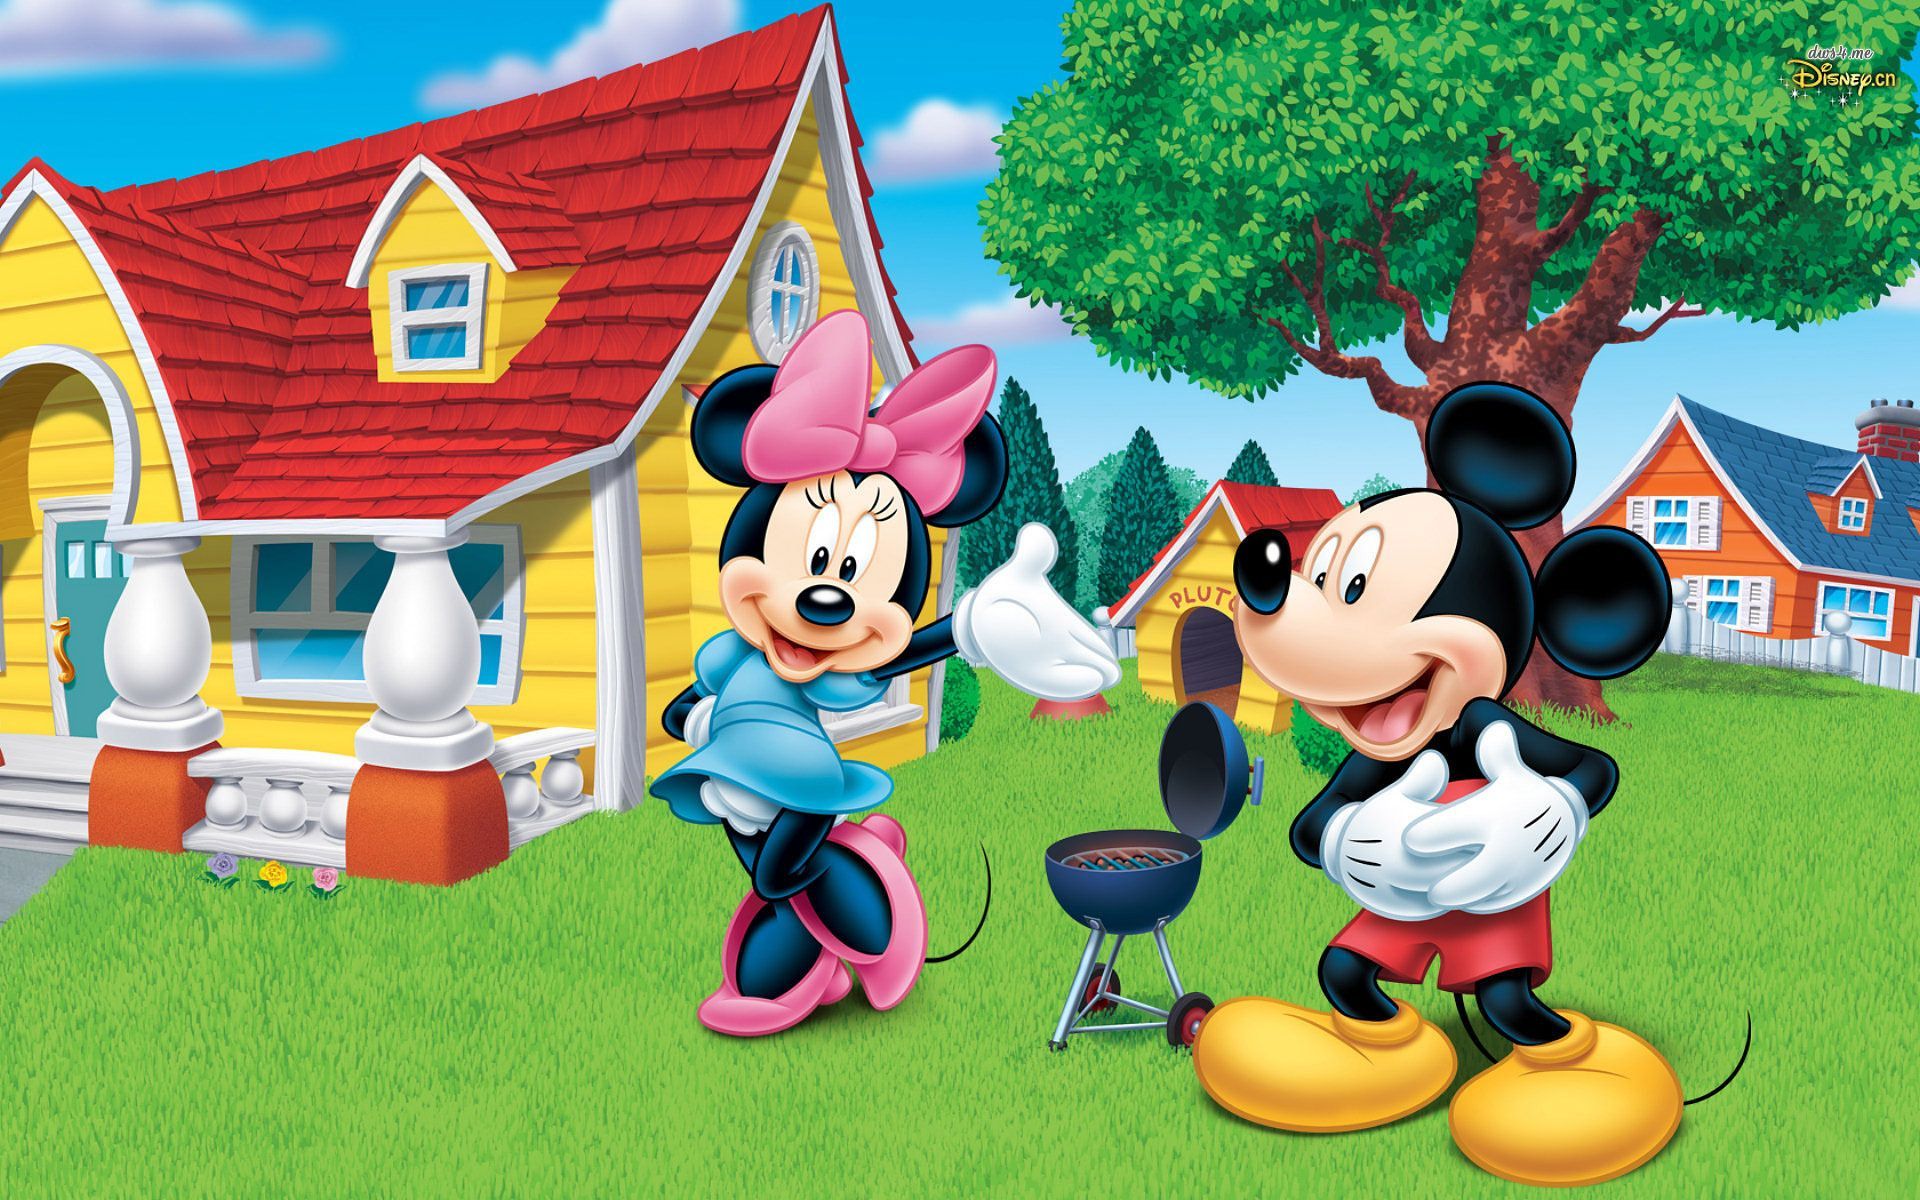 Minnie and Mickey Mouse wallpaper - Cartoon wallpapers -